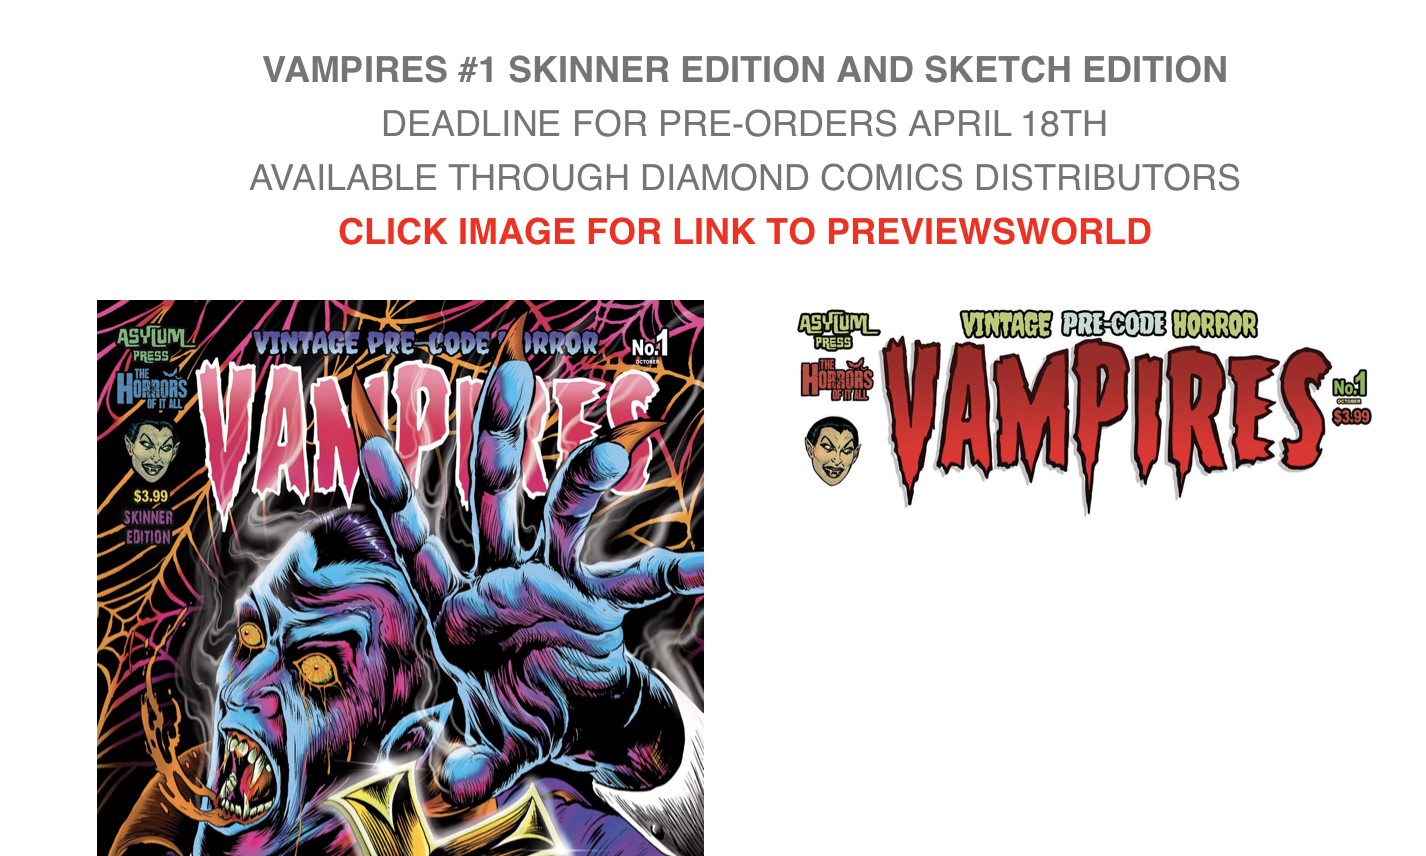 Vampires #1 Skinner and Sketch Variant available for pre-order through Diamond Comics-From THE COMiX NEWS WiRE.